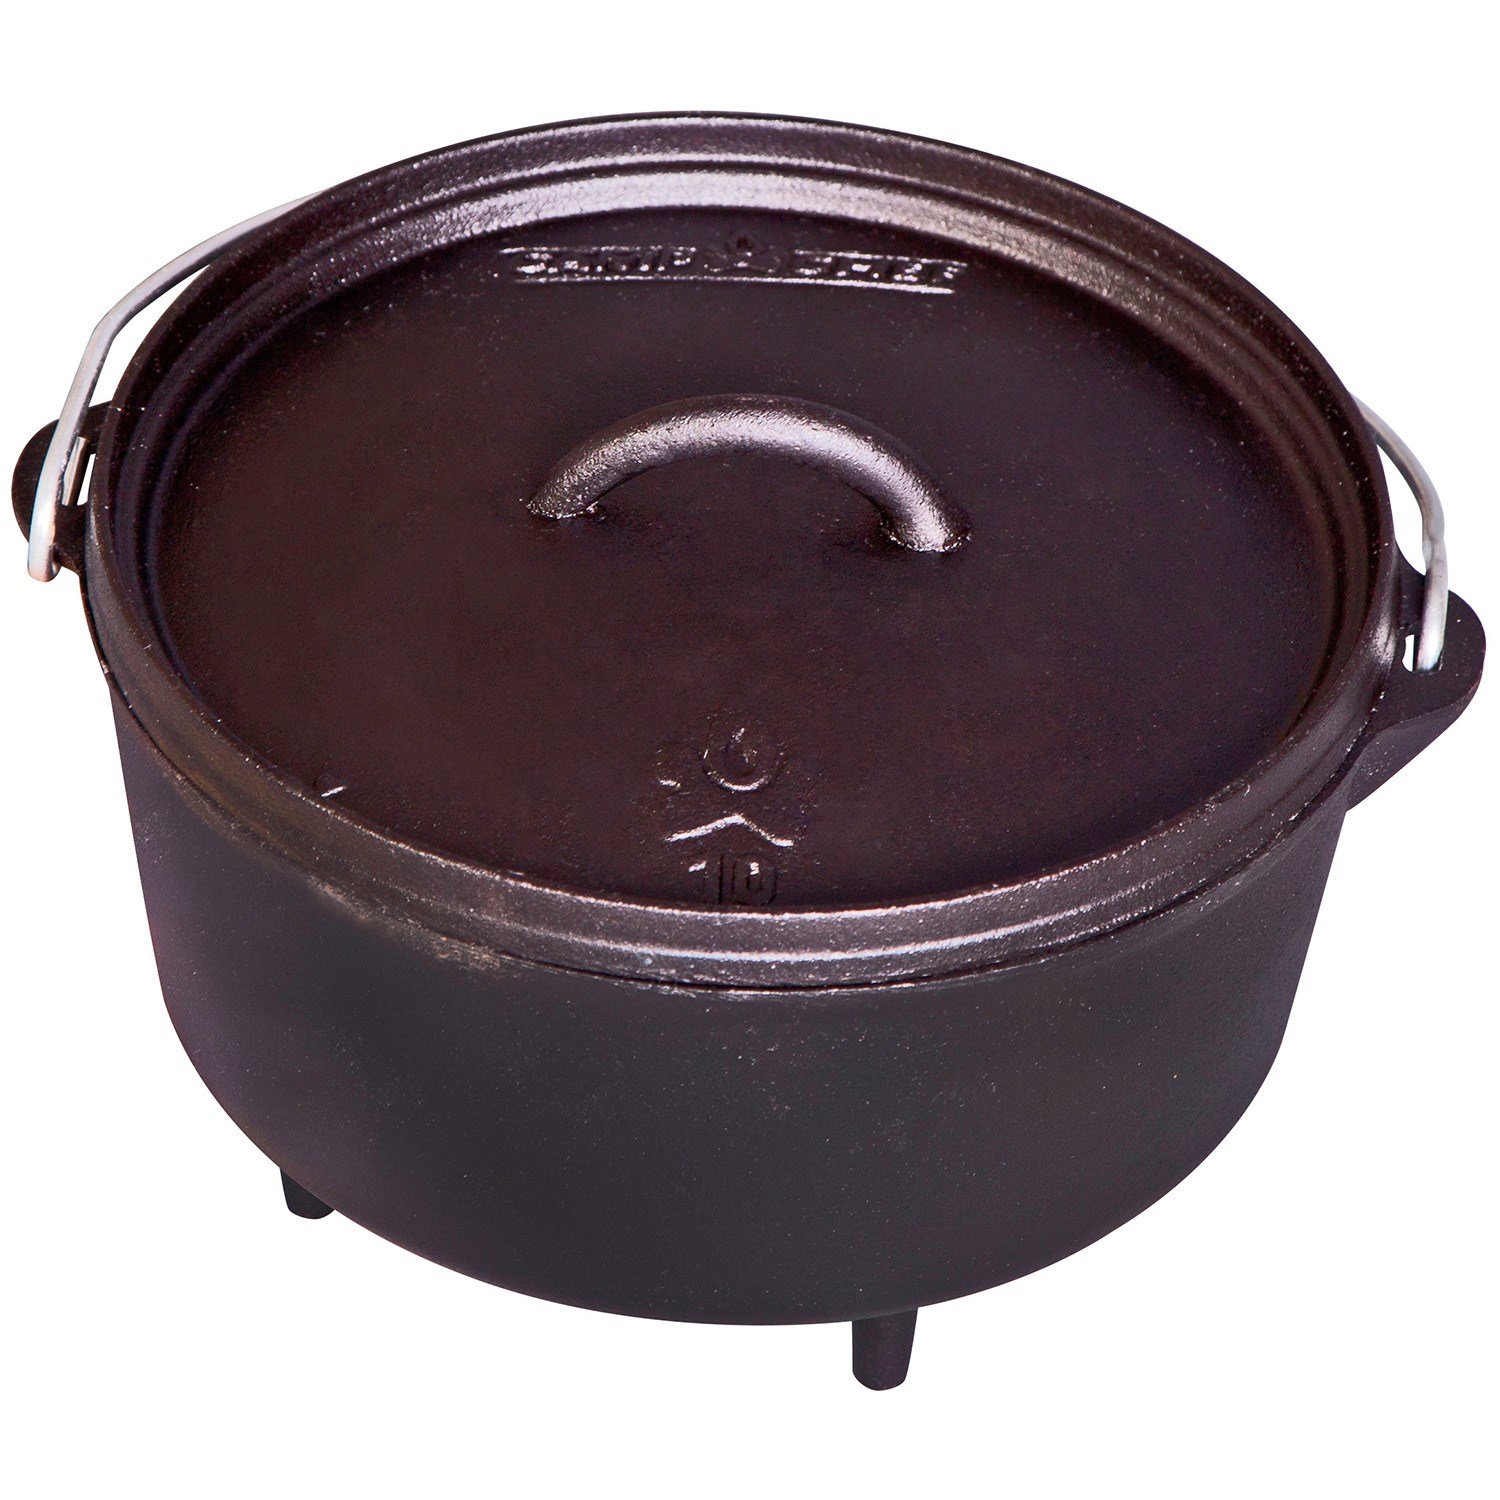 Camp Chef Dutch Oven Lid Lifter